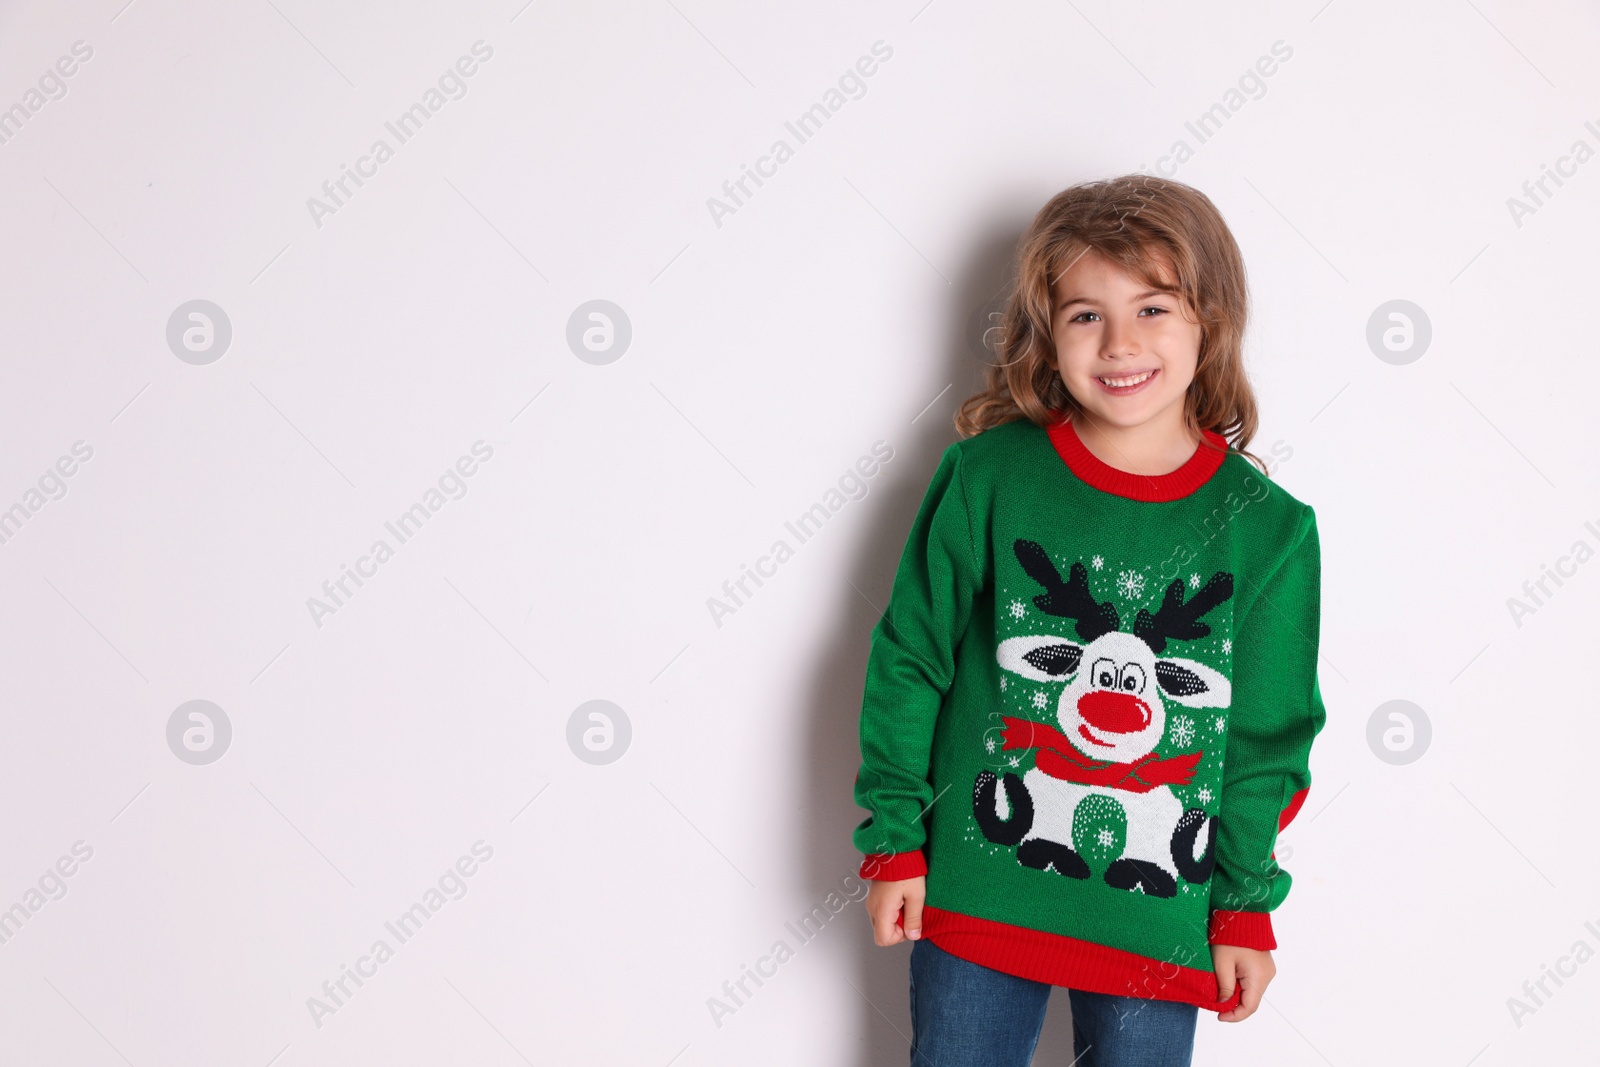 Photo of Cute little girl in green Christmas sweater smiling against white background